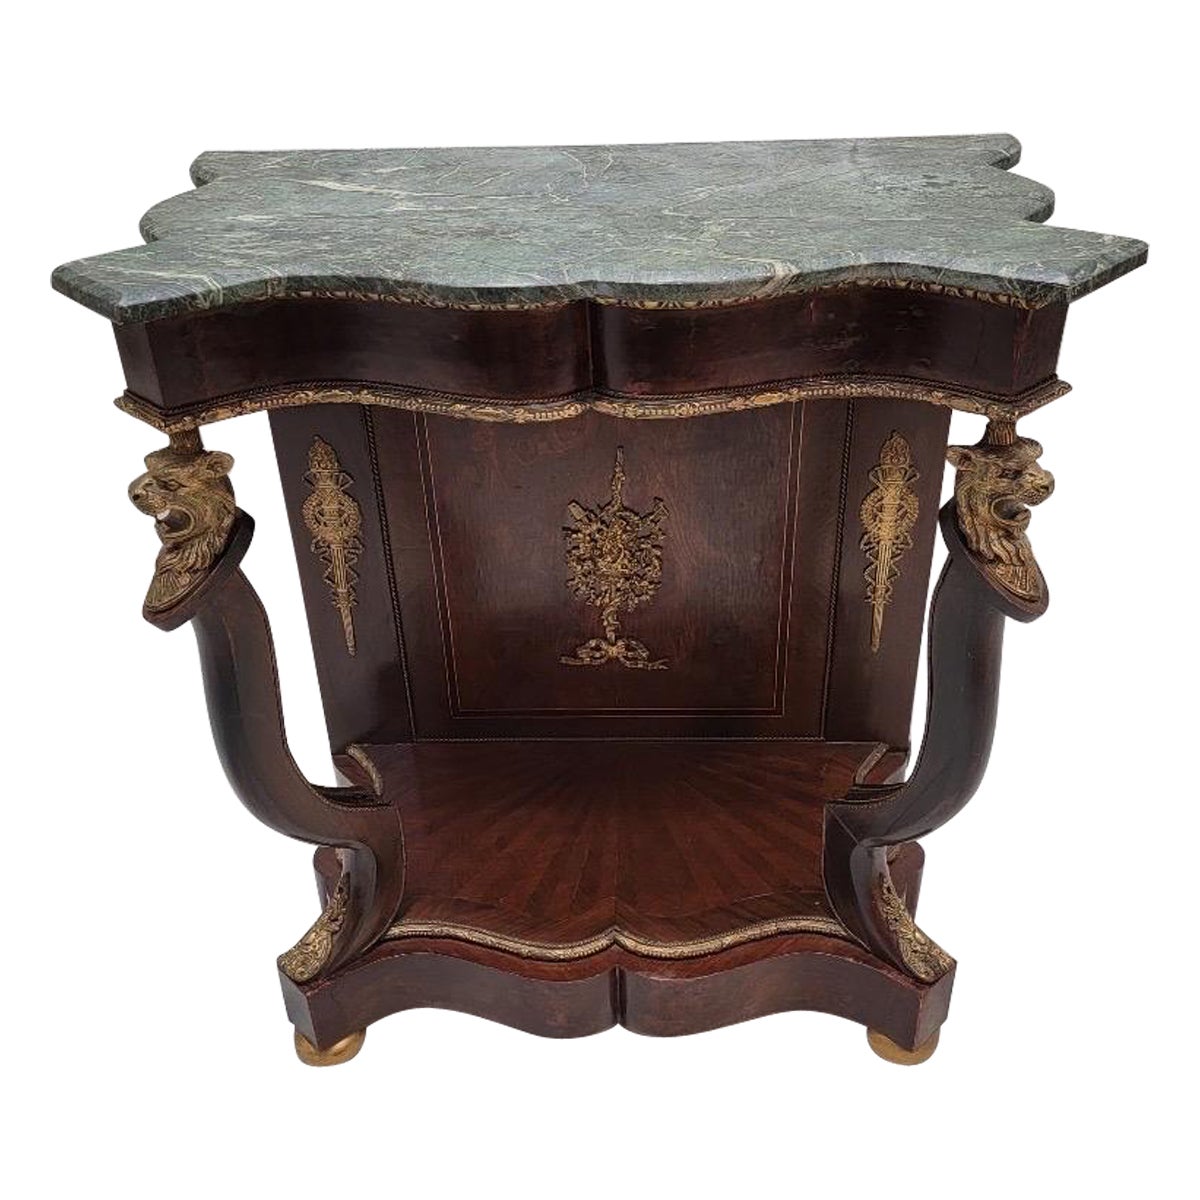 Antique French Empire Lion’s Head Ormolu Serpentine Console Table w/ Marble Top For Sale